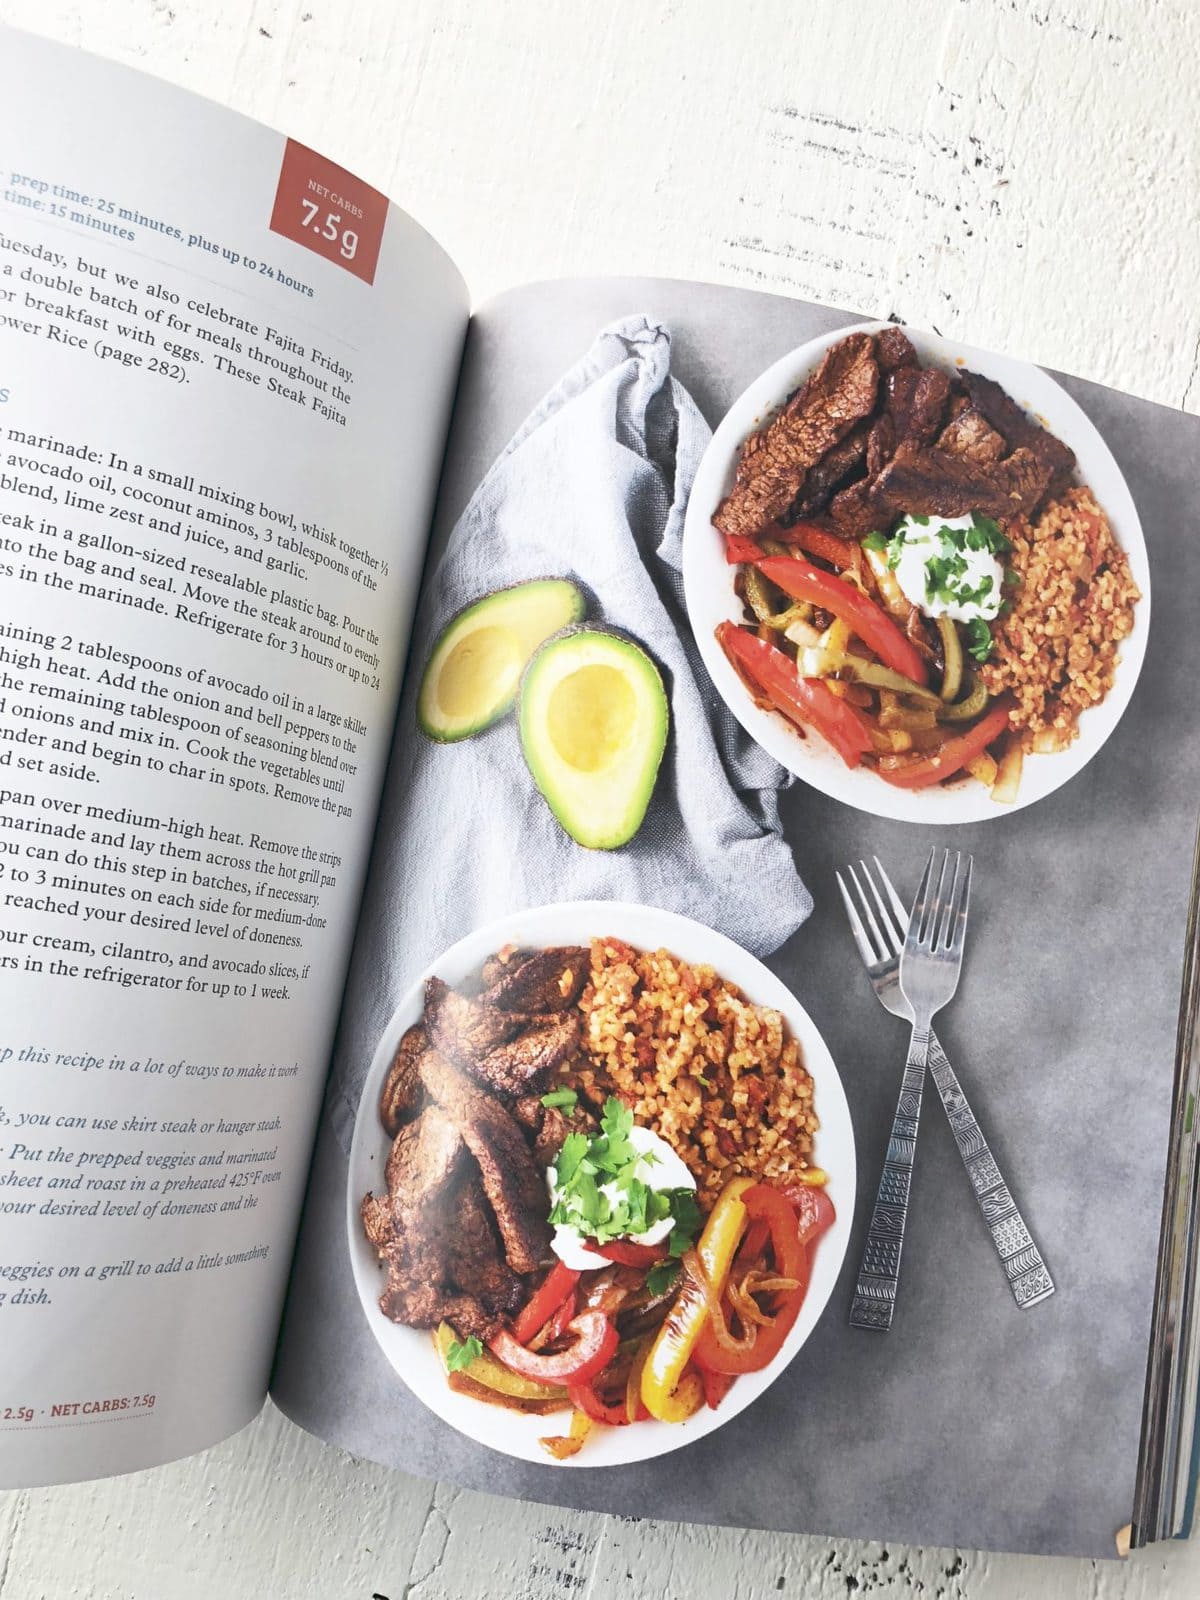 Craveable Keto Cookbook By Kyndra D. Holley